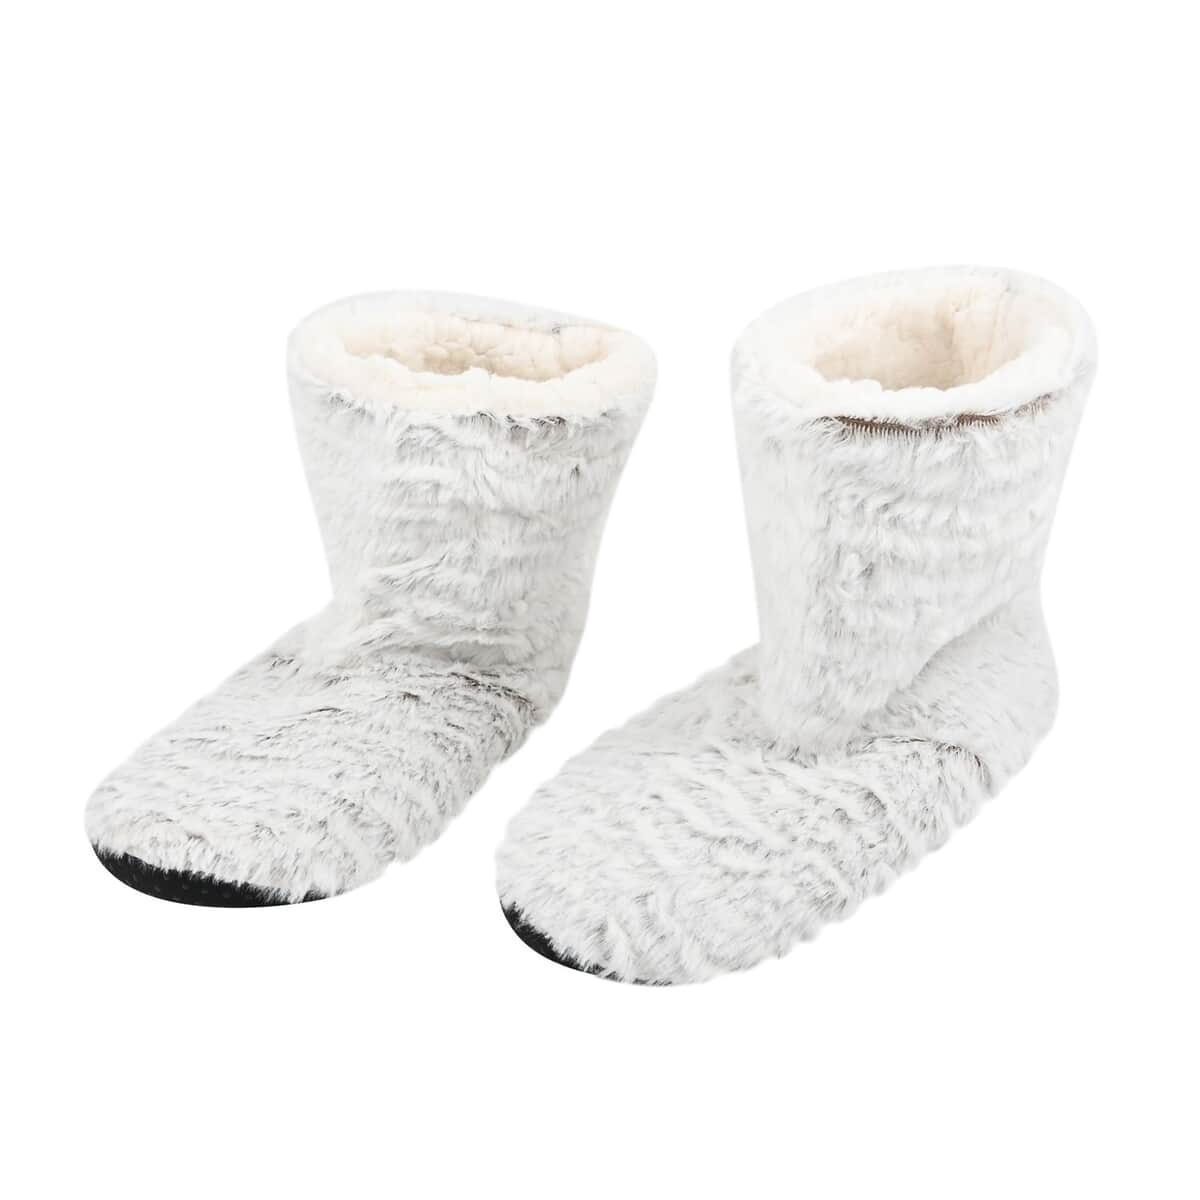 HOMESMART Light Gray Microfiber Faux Fur, Sherpa Booties and Matching Ballerina Slippers (Women's Size 5-10) image number 1